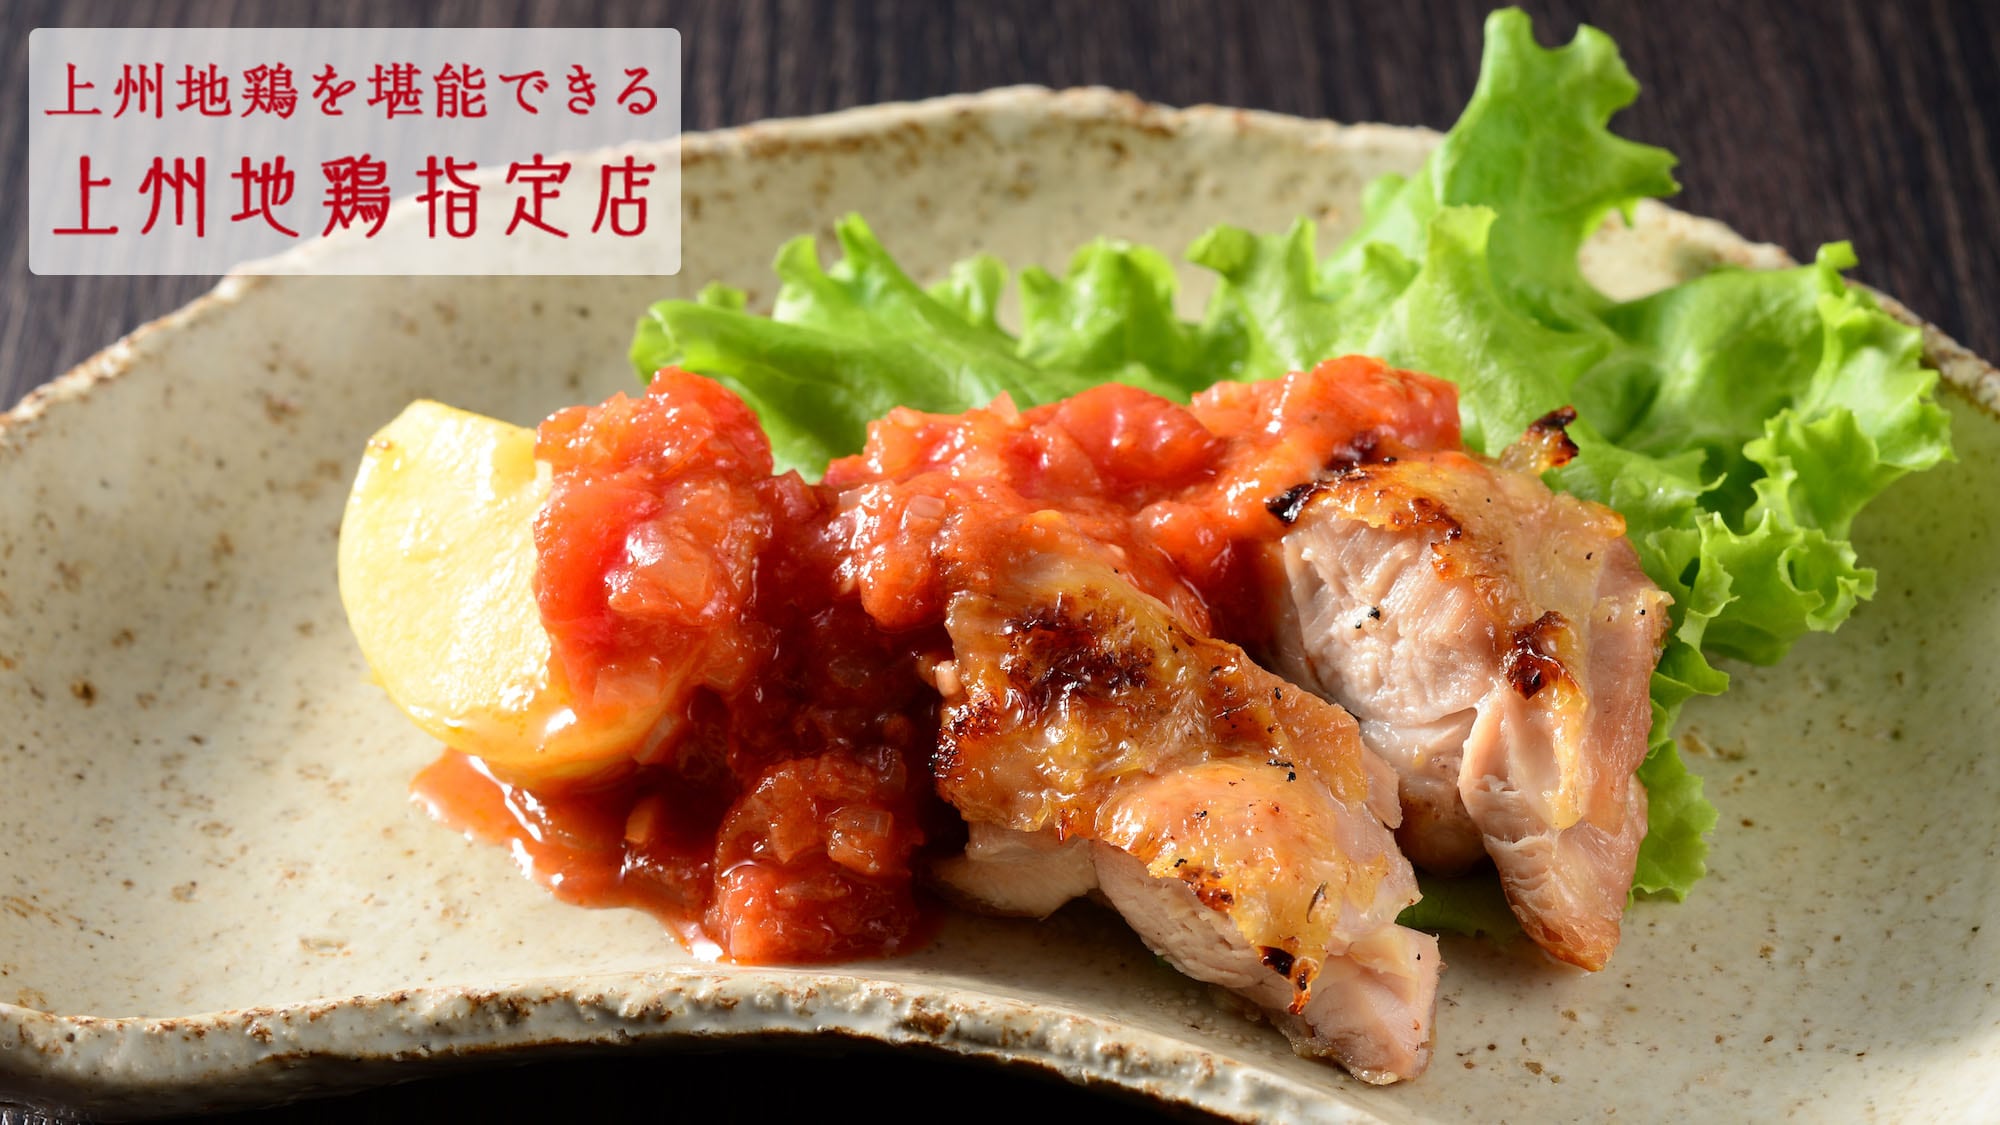 Joshu Jidori: A dish of rare high-class chicken from Gunma entwined with rich and tasty tomato sauce.